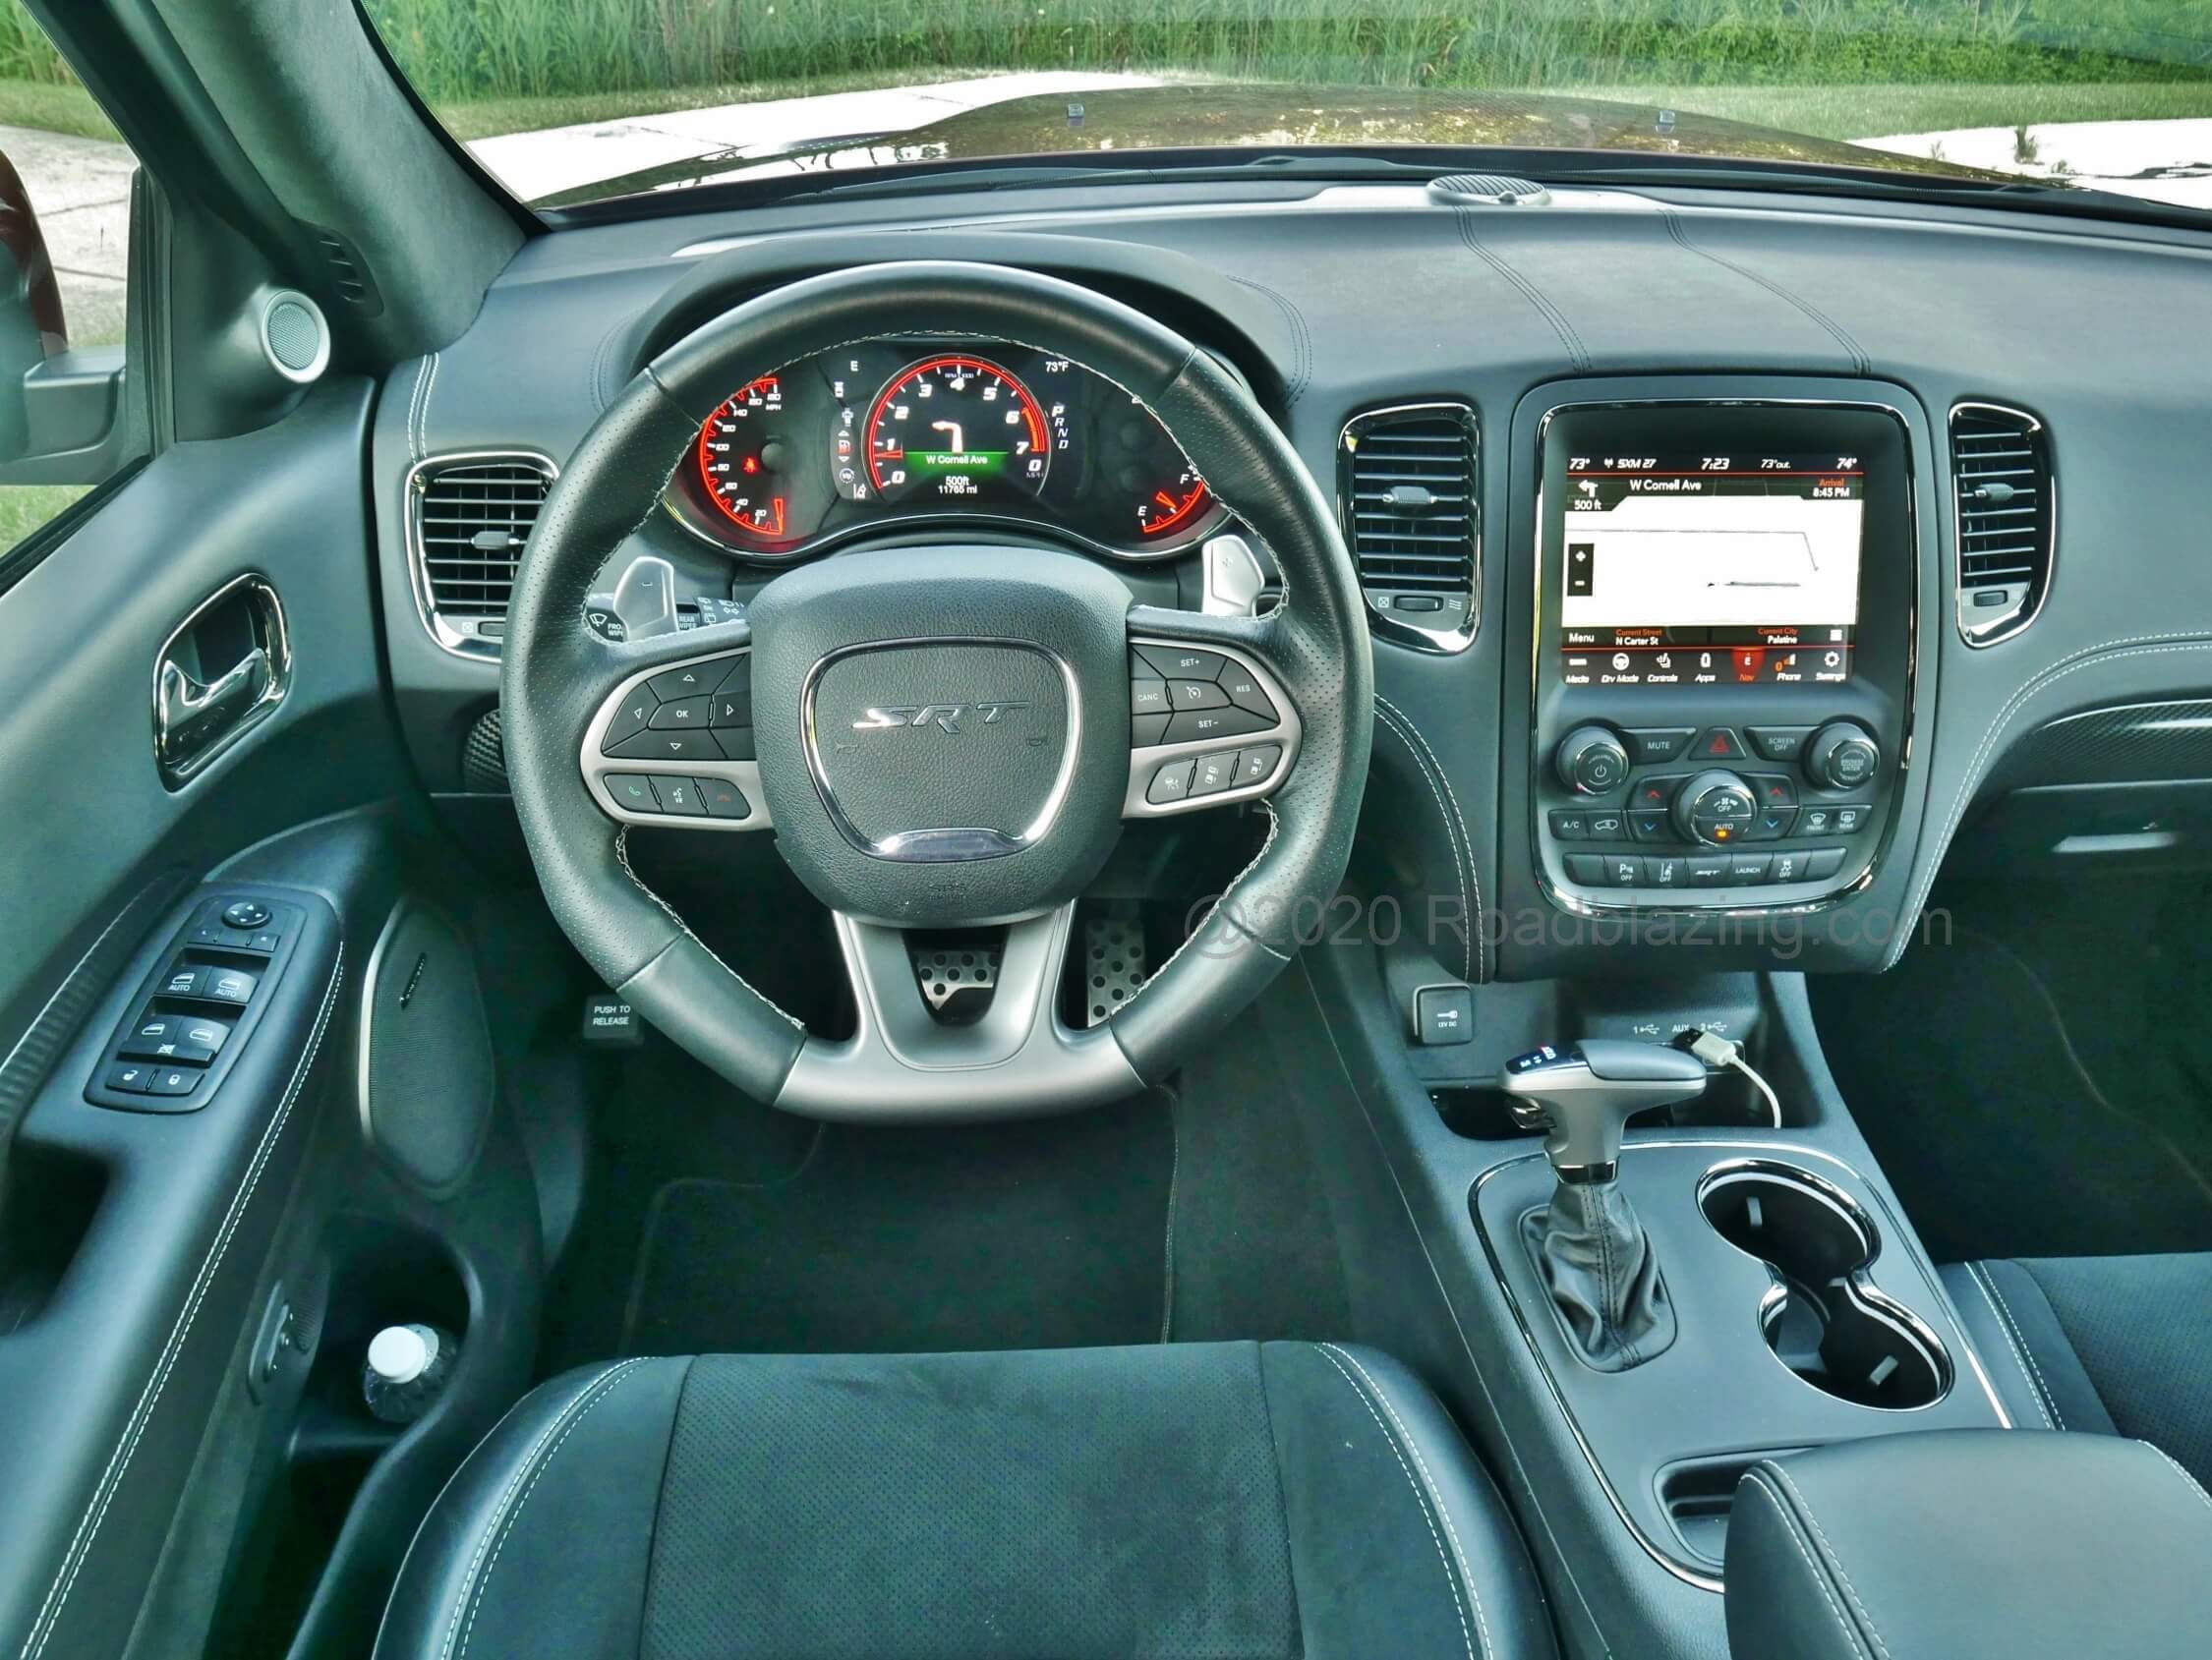 2020 Dodge Durango SRT 392: native voice control HDD GPS navigation displays in gauge cluster and 8.4" LCD touch UConnect screen